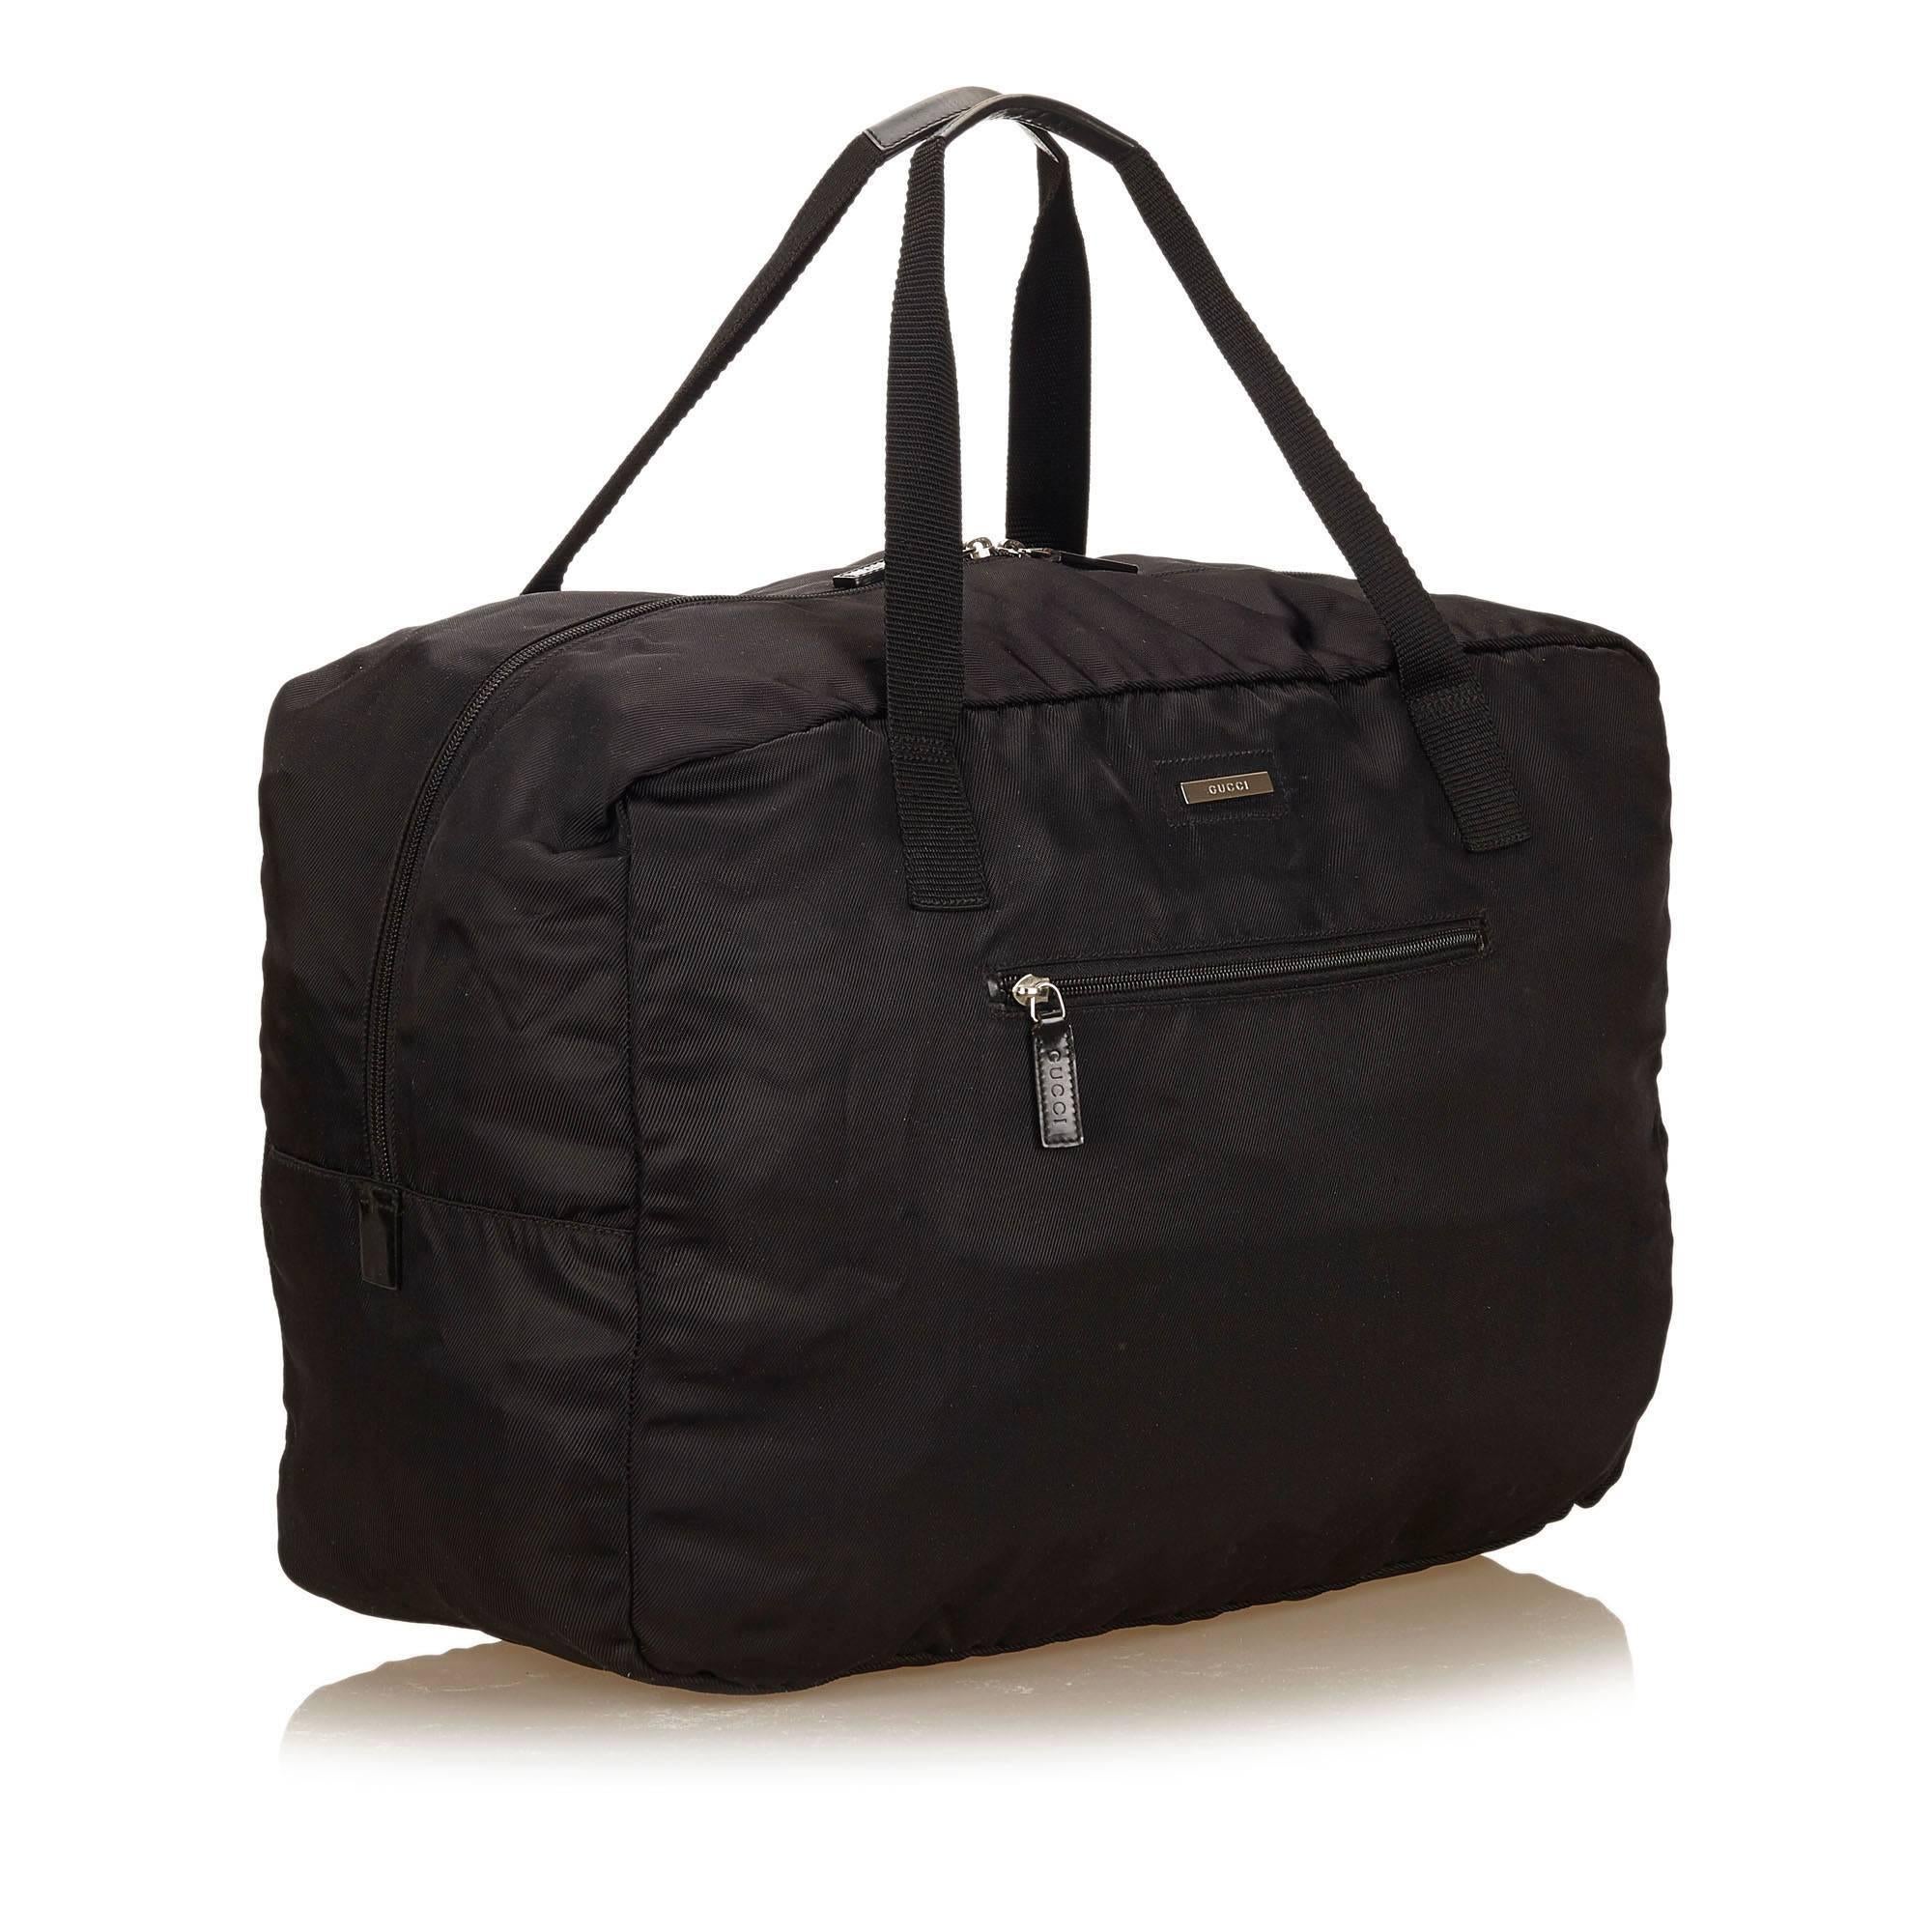 This duffel bag features a nylon body, front exterior zip pocket, flat nylon handles, top zip closure, and interior zip pocket. It carries a B+ condition rating.

Inclusions: 
None